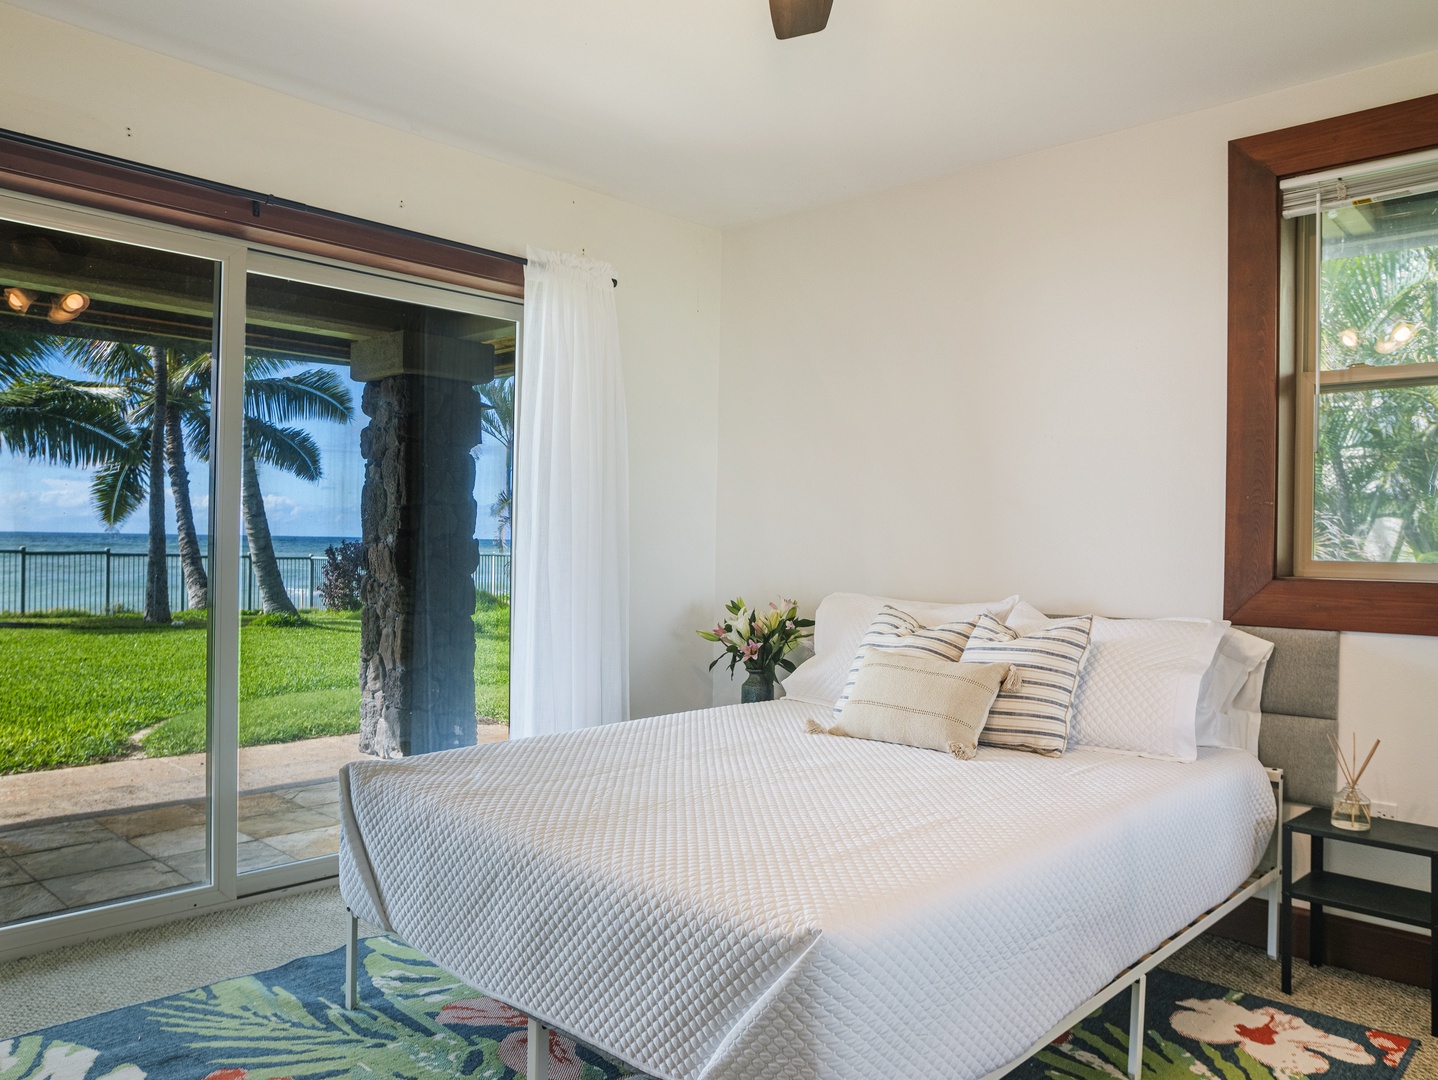 Waianae Vacation Rentals, Konishiki Beachhouse - Guest suite with access to outdoors, a perfect spot to be greeted in the morning by nature.